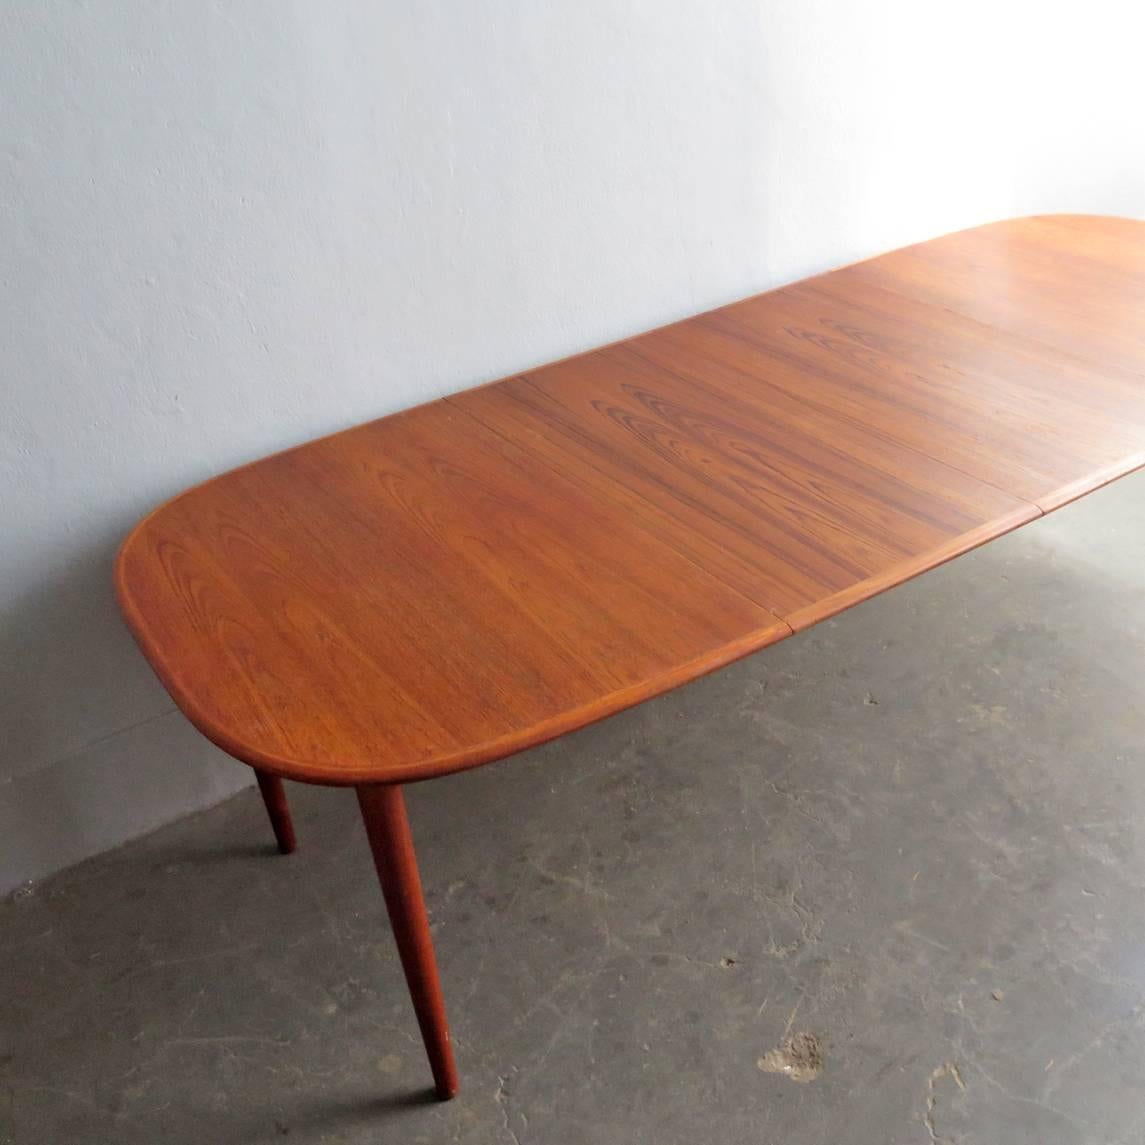 20th Century Danish Teak Elegant Dinning Table with Two Extensions Leafs